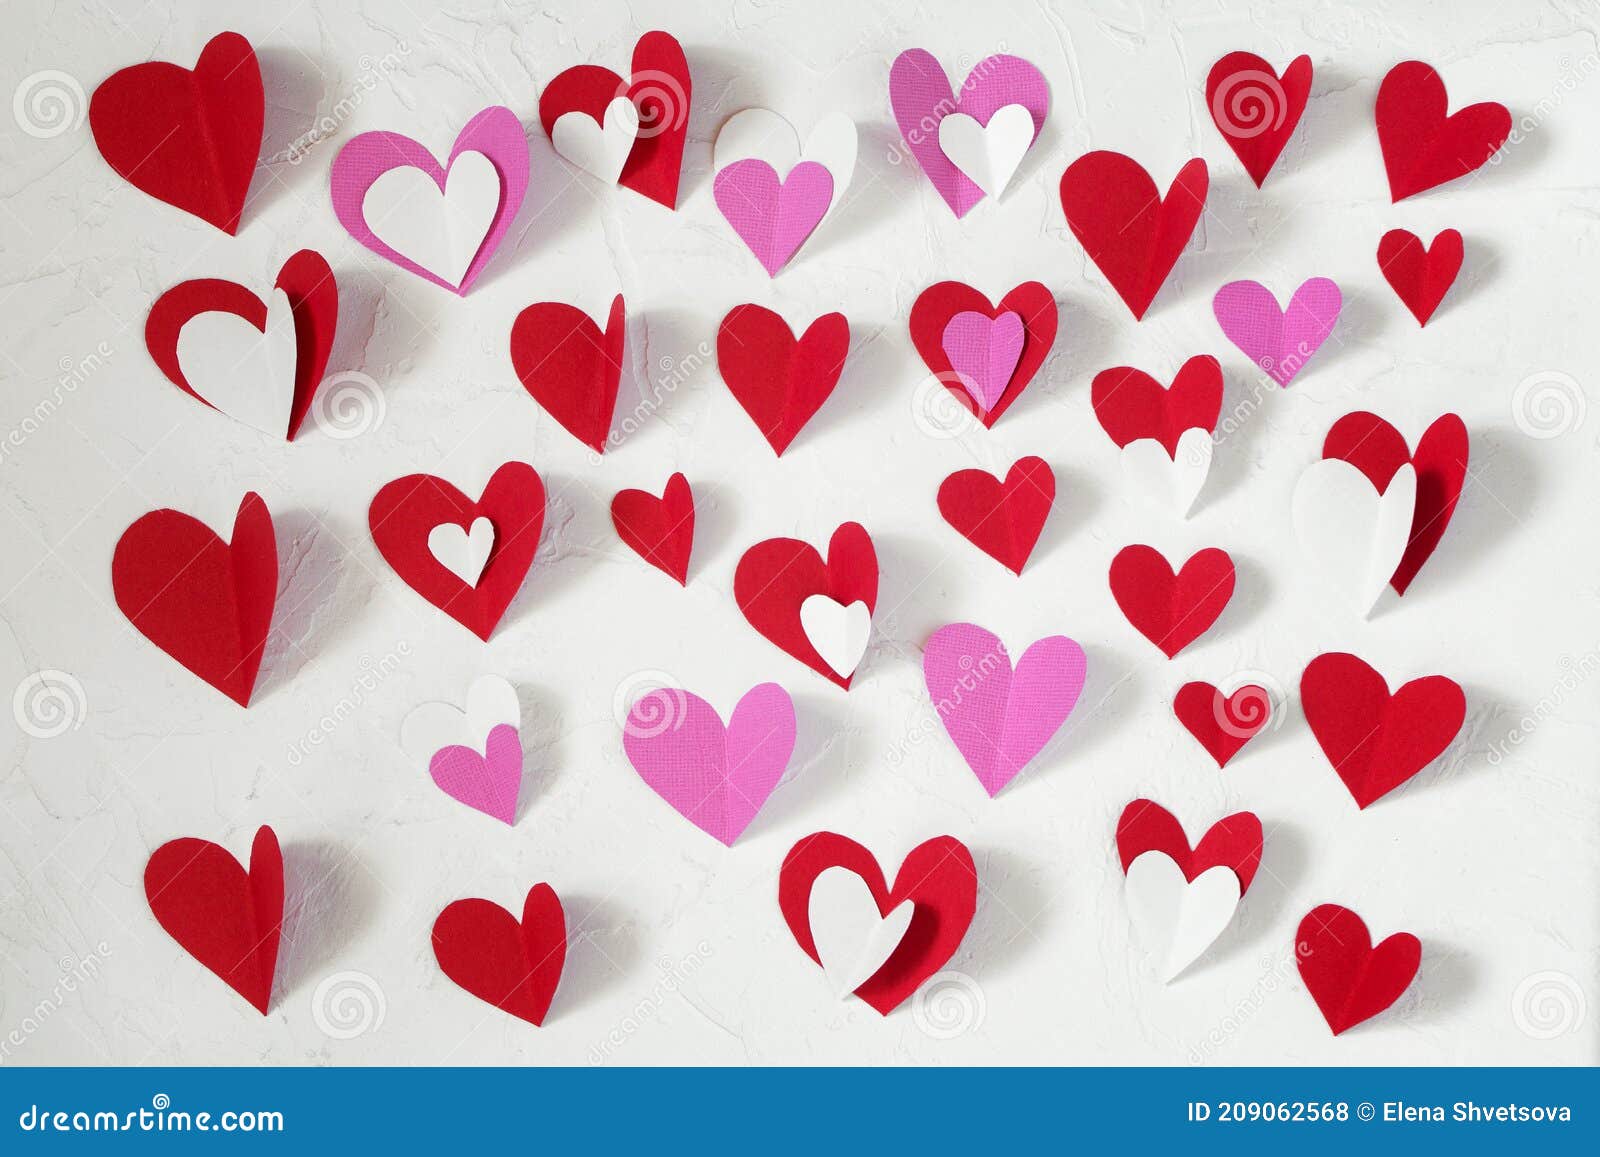 Red, White and Pink Paper Hearts Cut Out of Paper for Decorating on  Valentine S Day on a White Table. Valentine S Day Stock Photo - Image of  white, blank: 209062568